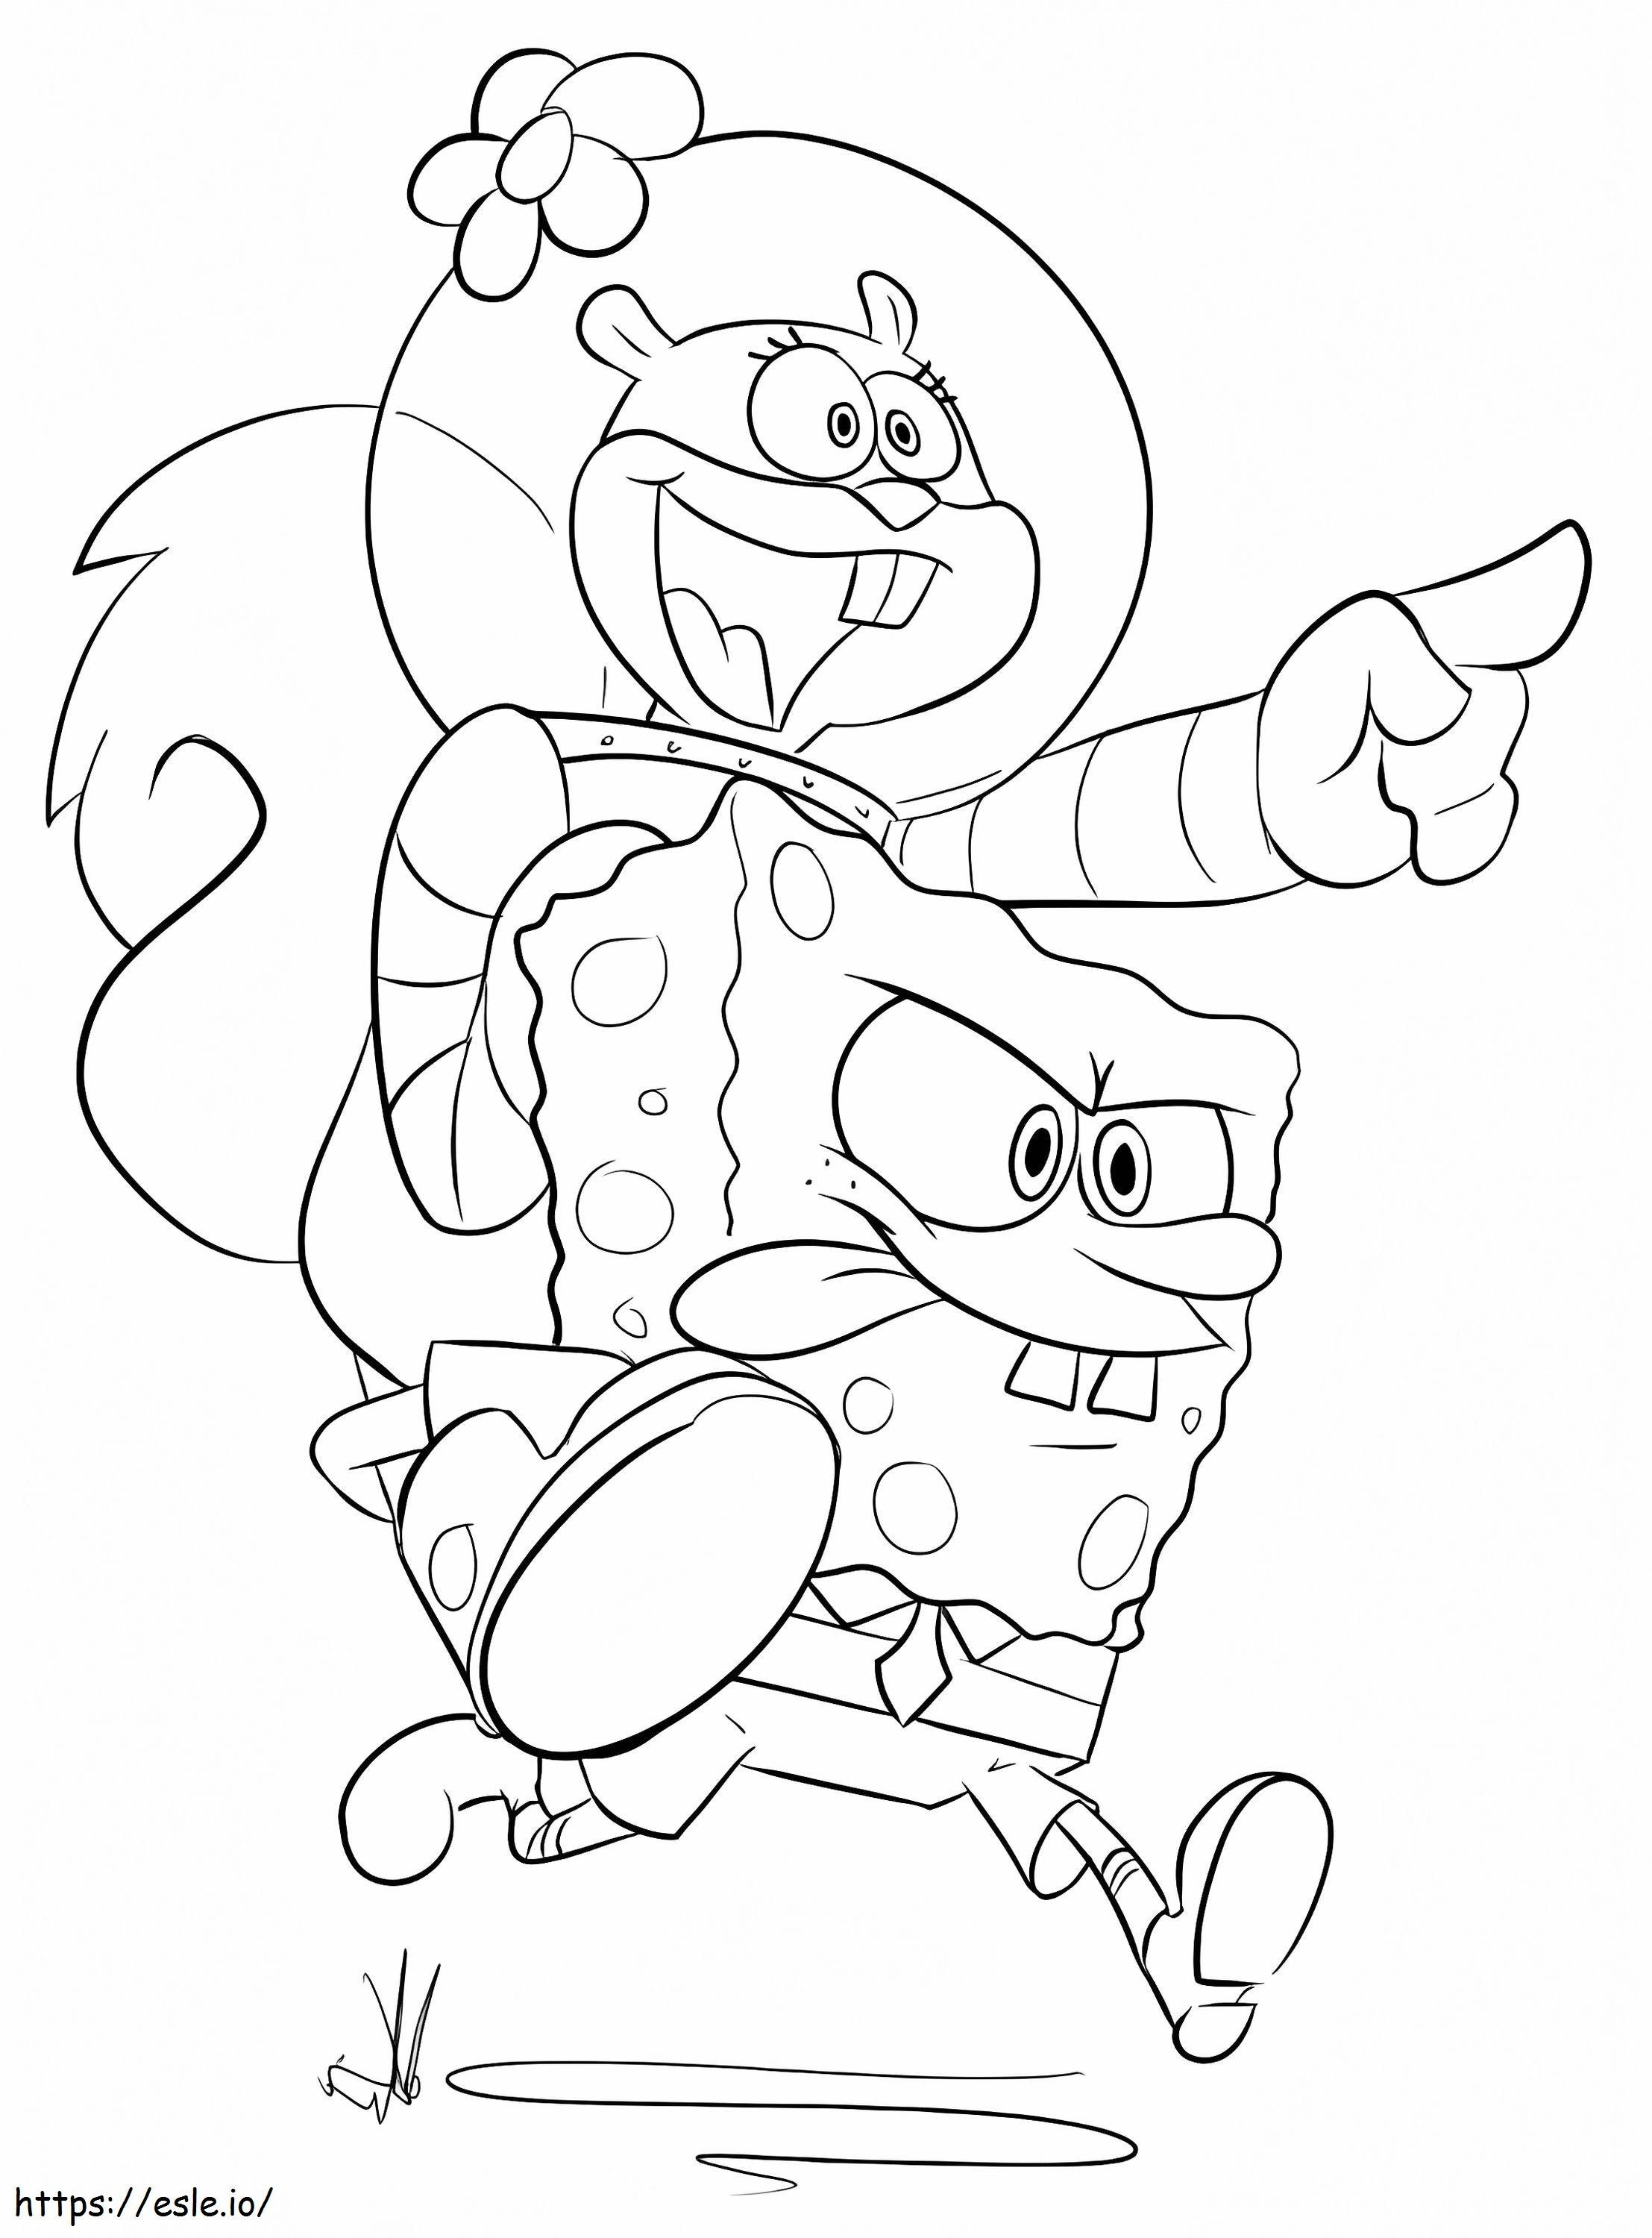 Funny Spongebob And Sandy Cheeks coloring page